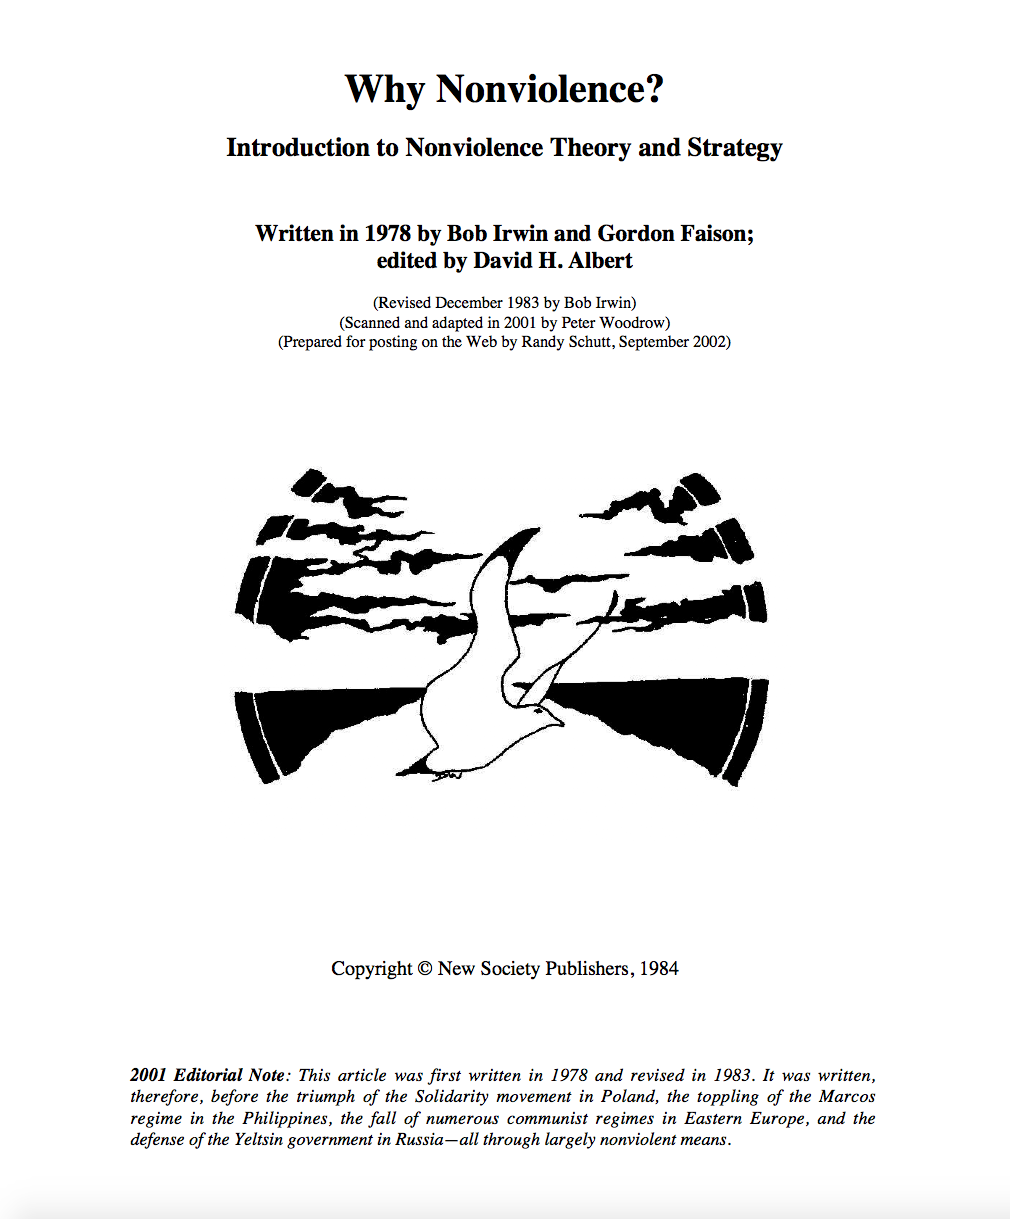 Why Nonviolence? Introduction to Nonviolence Theory and Strategy